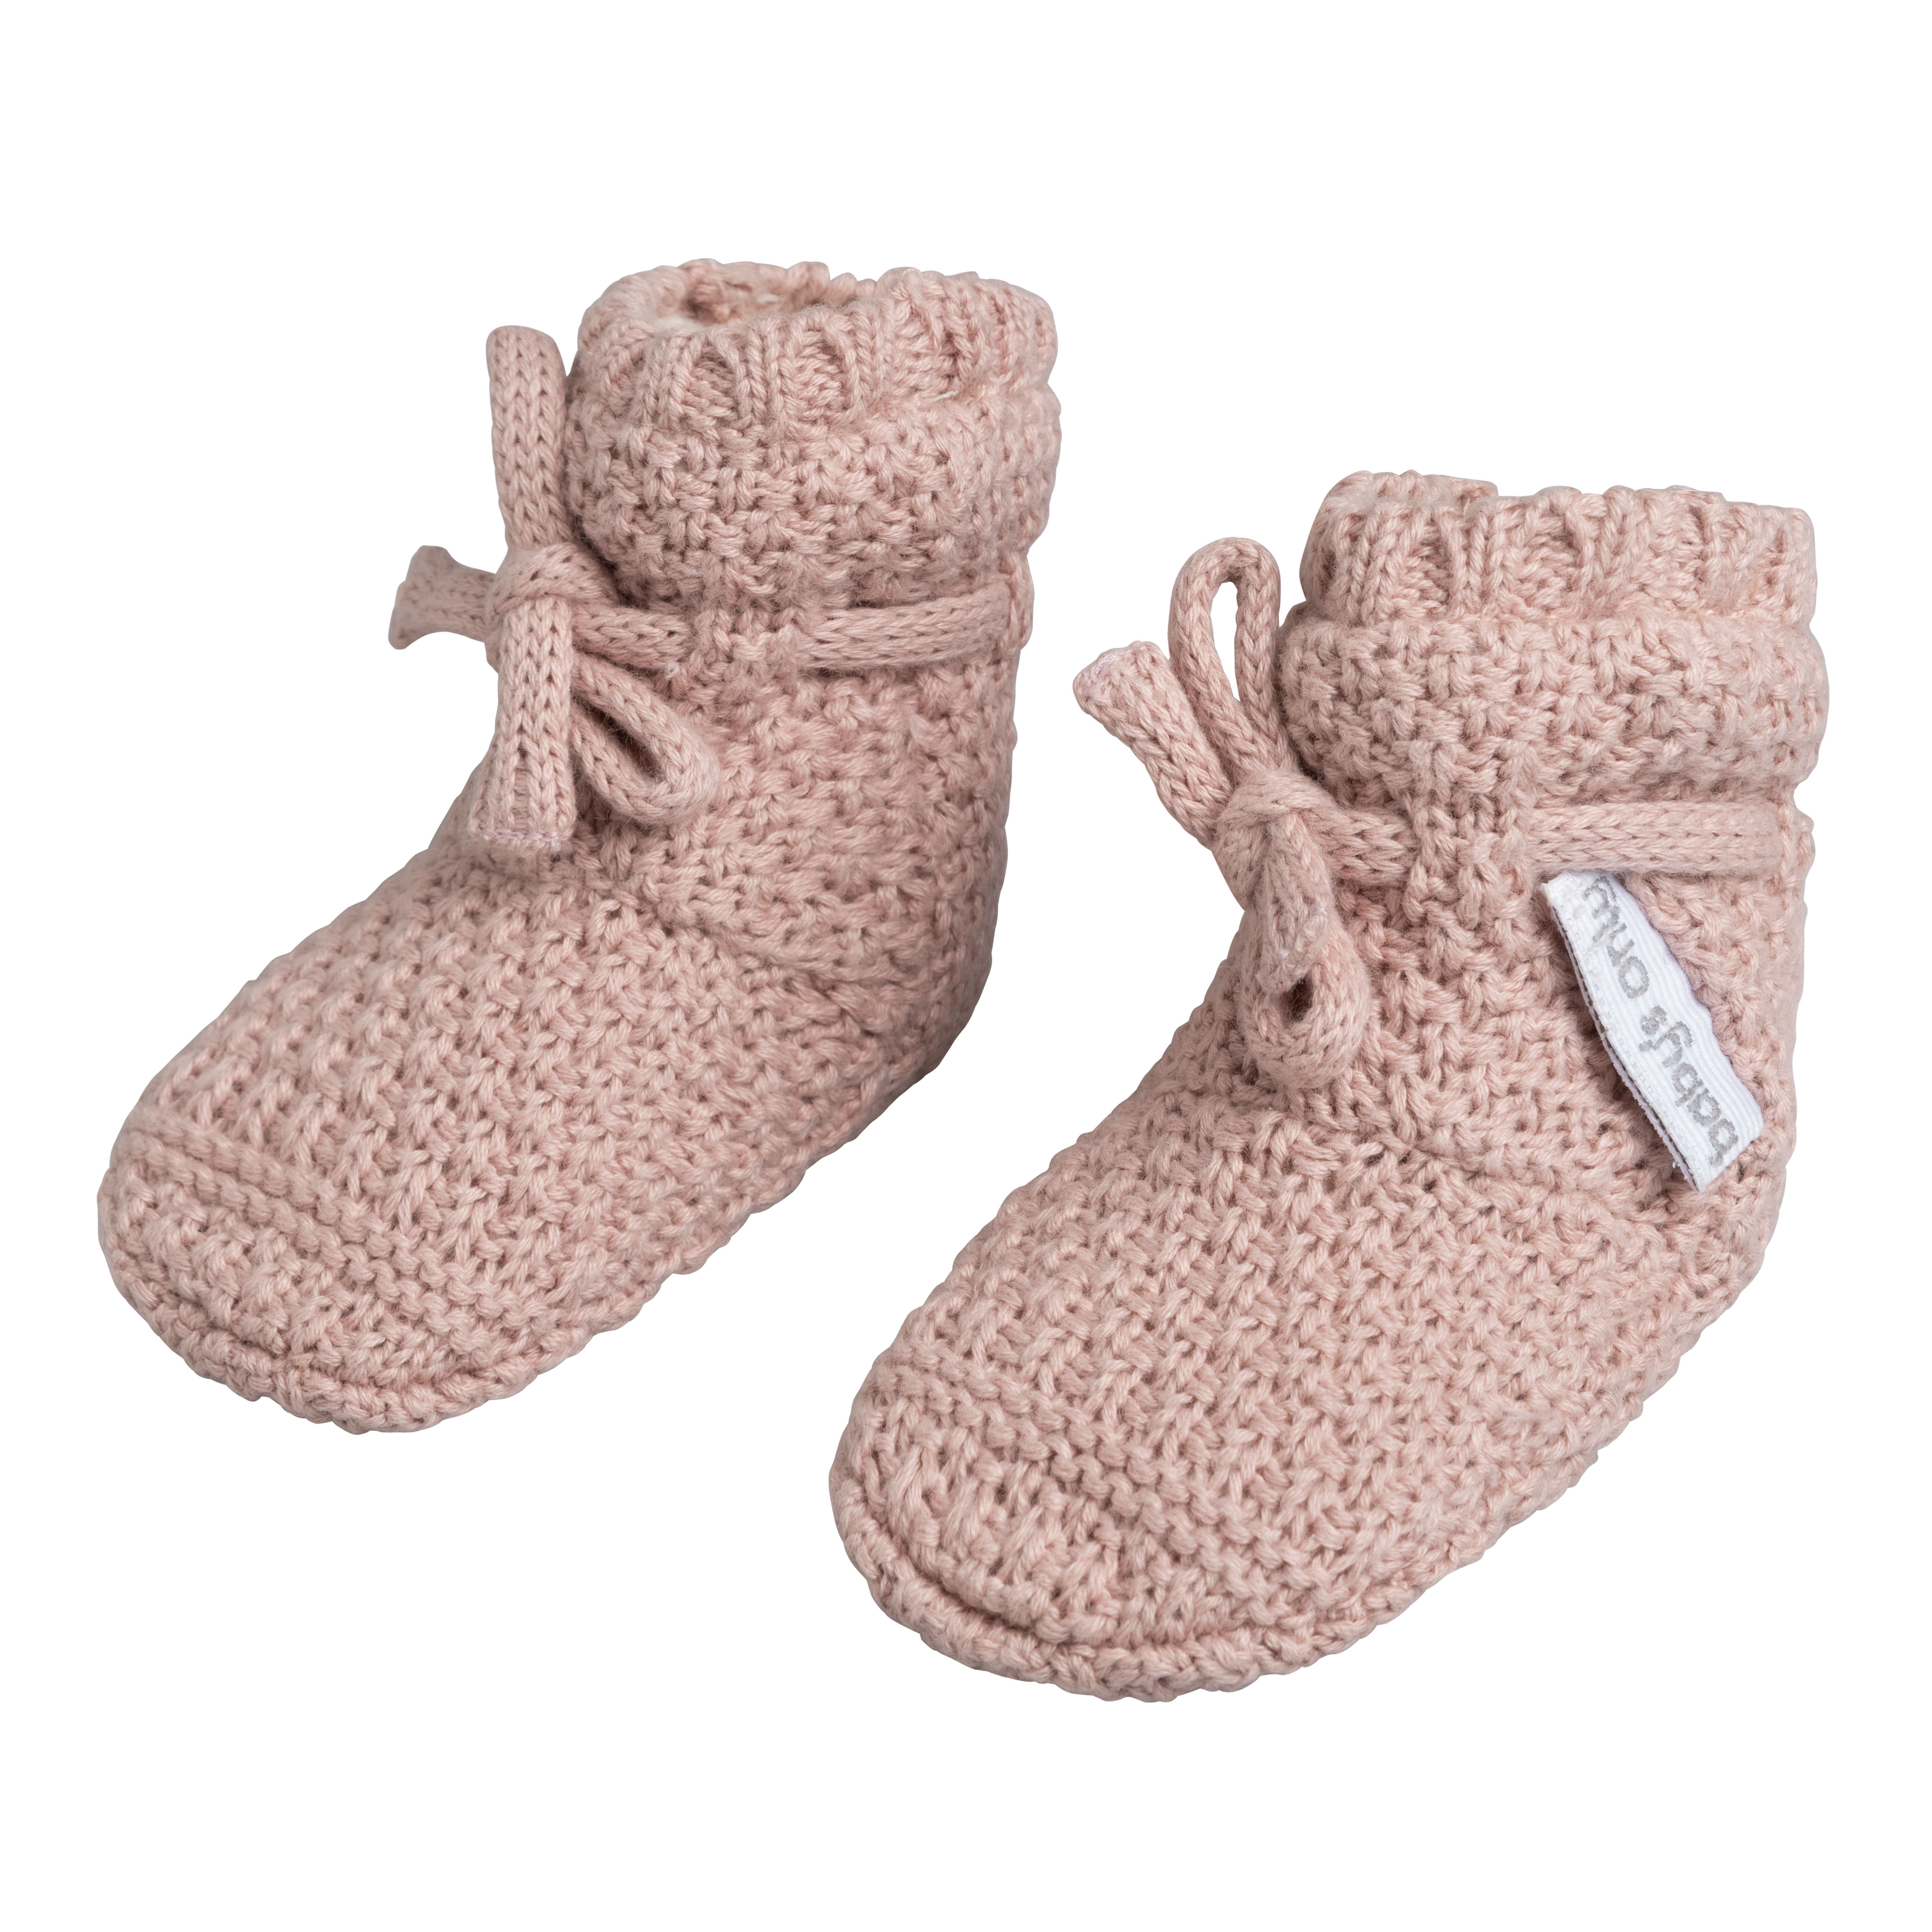 Chaussons teddy Willow vieux rose - 3-6 mois